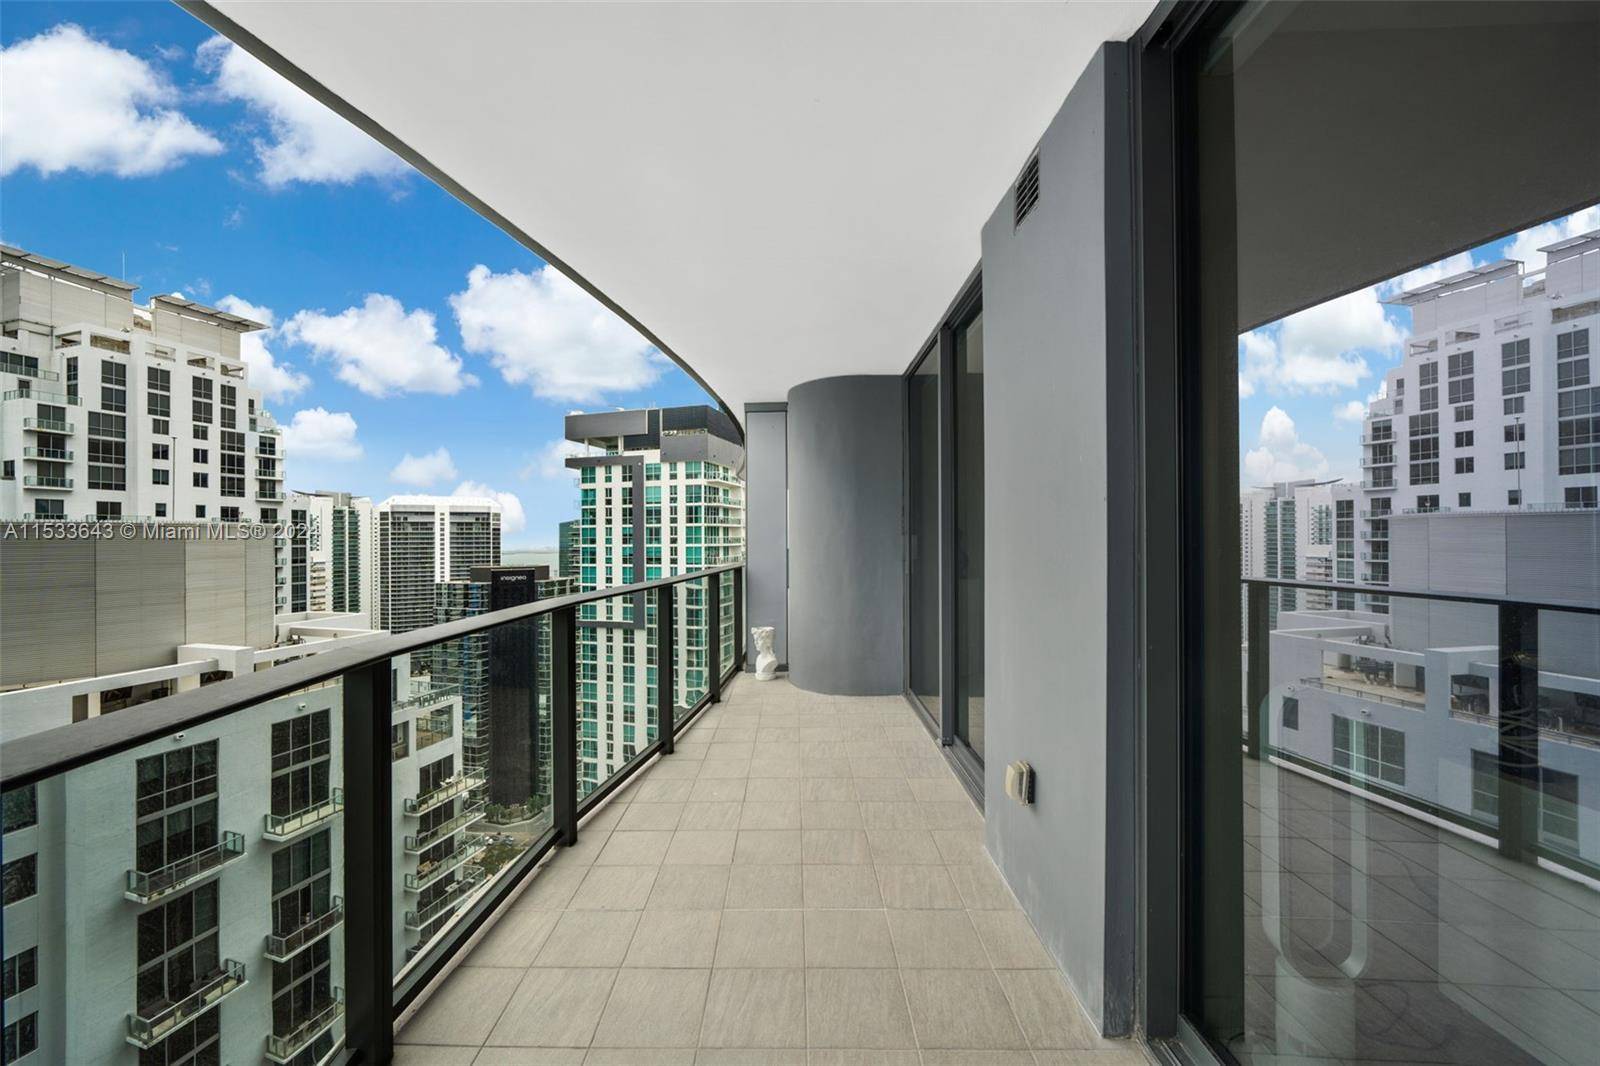 Experience luxury living in this exquisite one bedroom, one and a half bathroom unit nestled on the highest floor of the esteemed Hugo Colombo development, Brickell Flatiron.